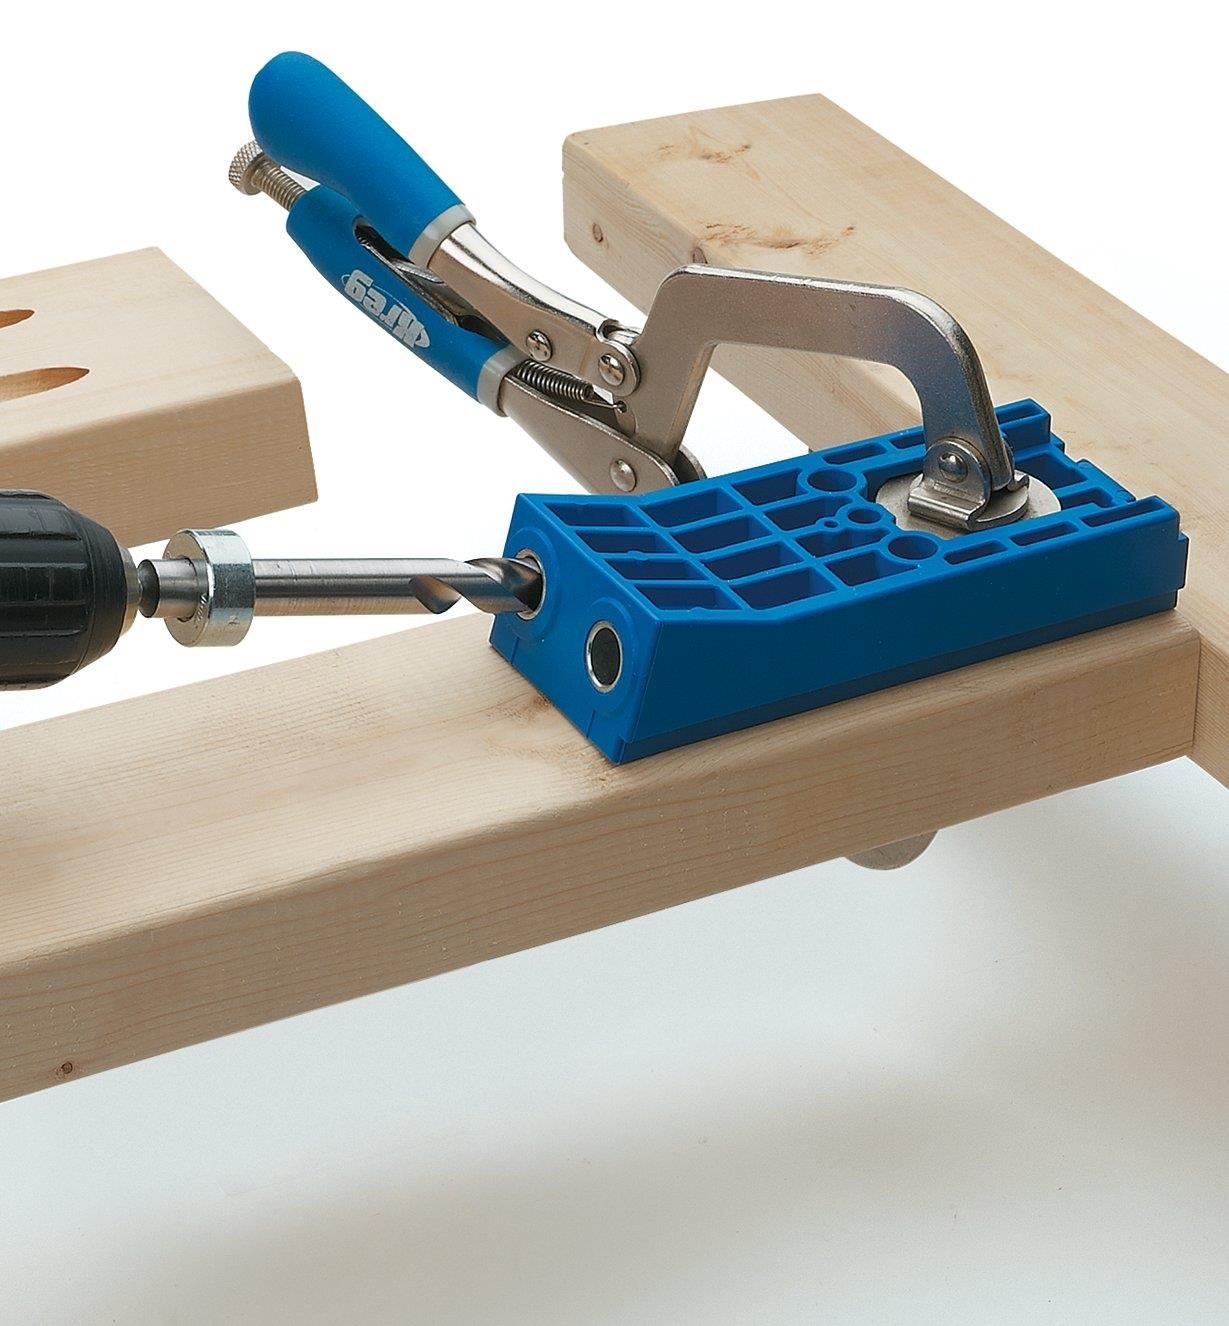 Drilling pocket holes using Kreg Heavy-Duty Jig clamped to a board